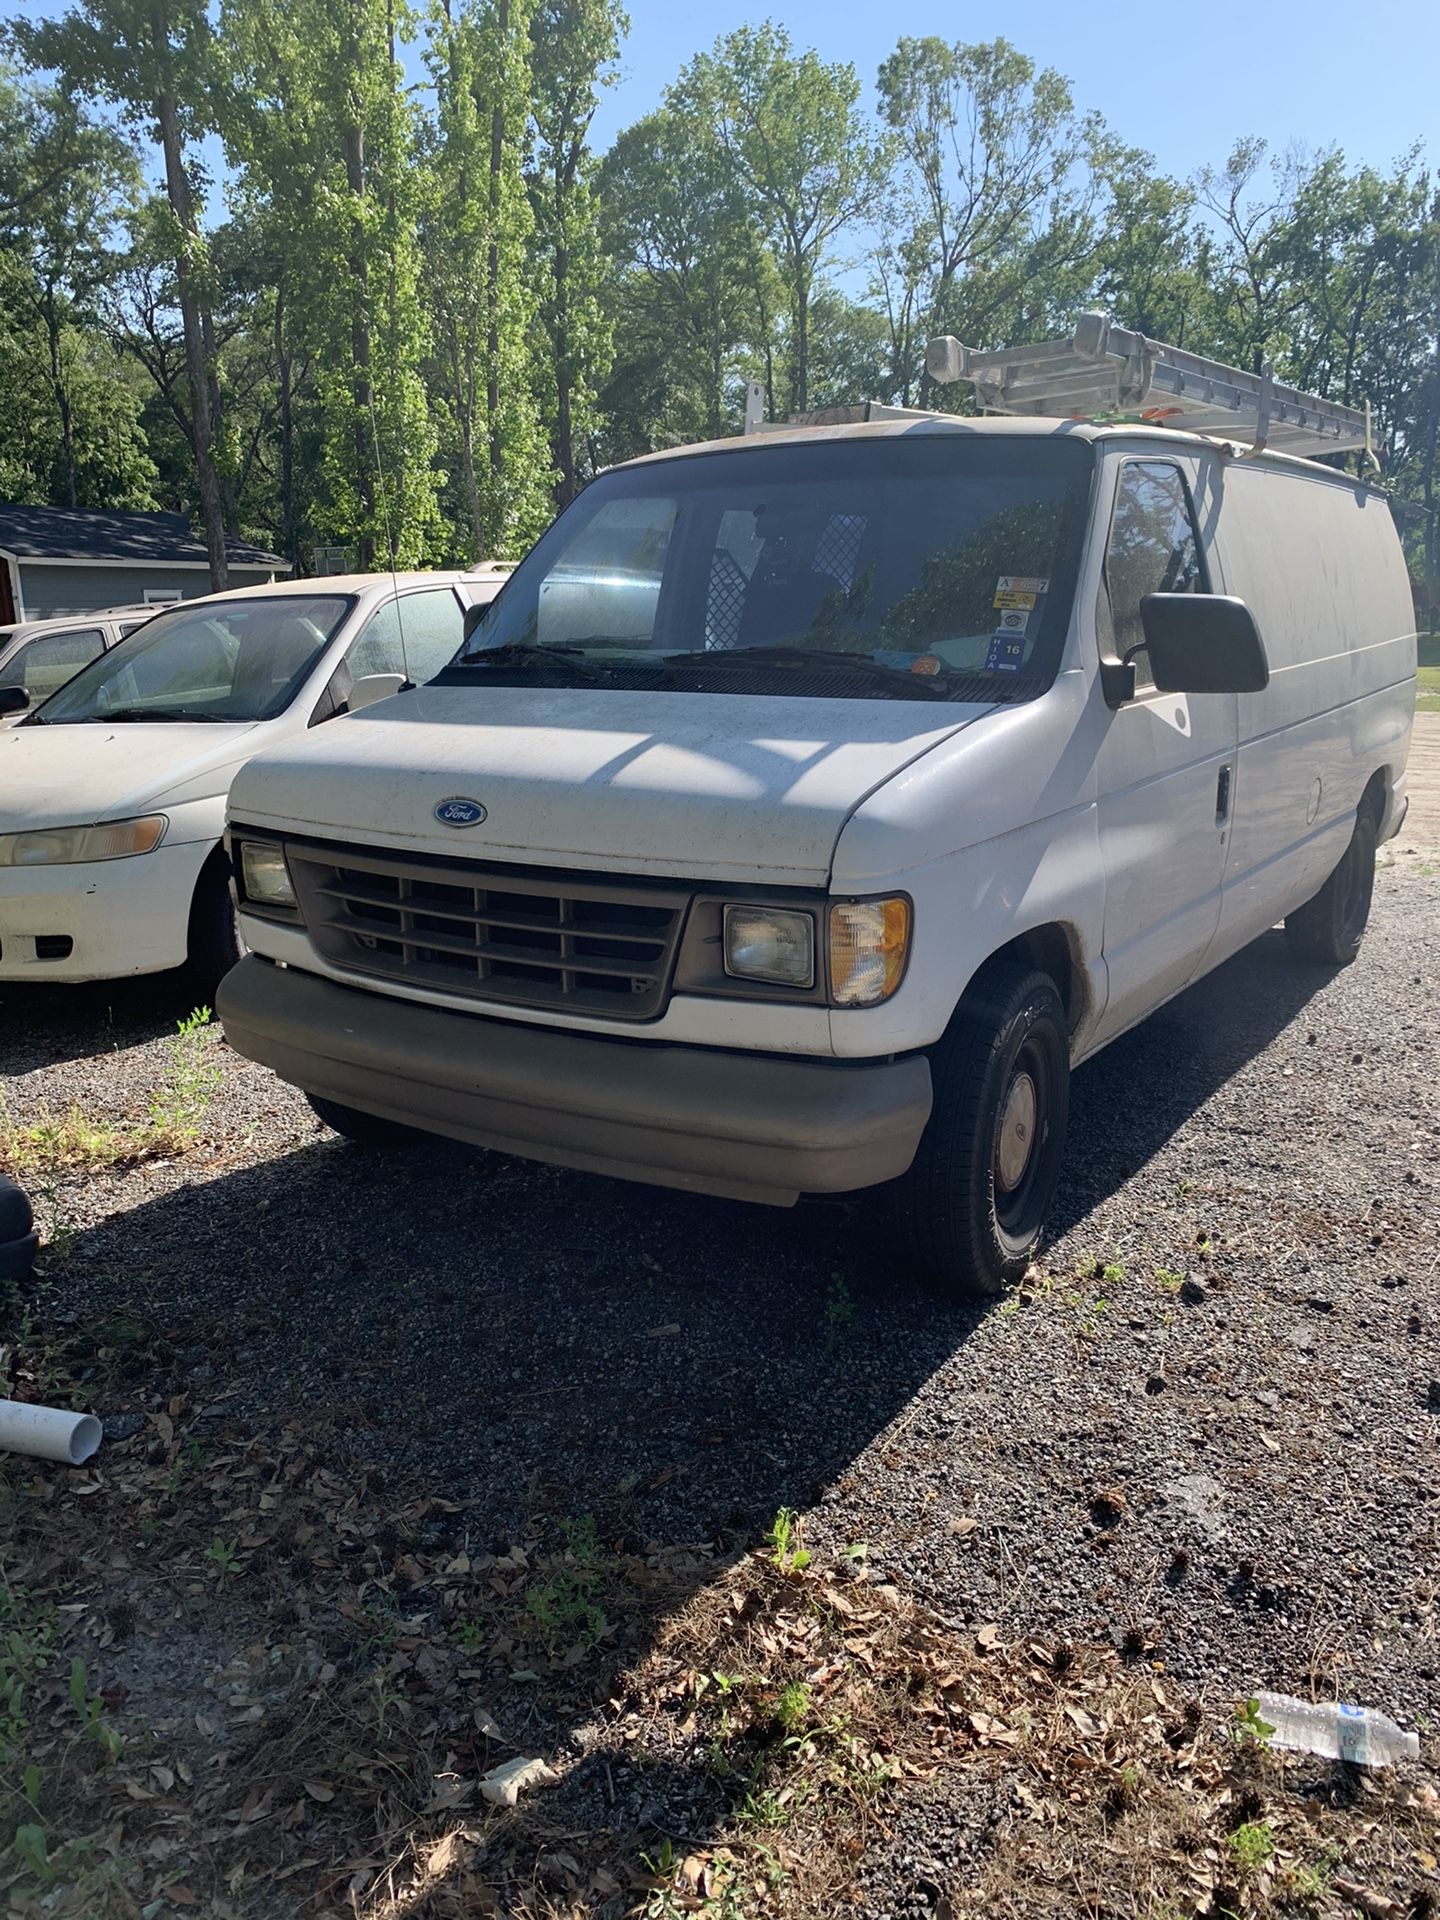 1996 Ford Econo new transmission 20,000 miles new tires price $700 Honda New tires only need transmission $500 2001 Mazd Tribut only need transmissio